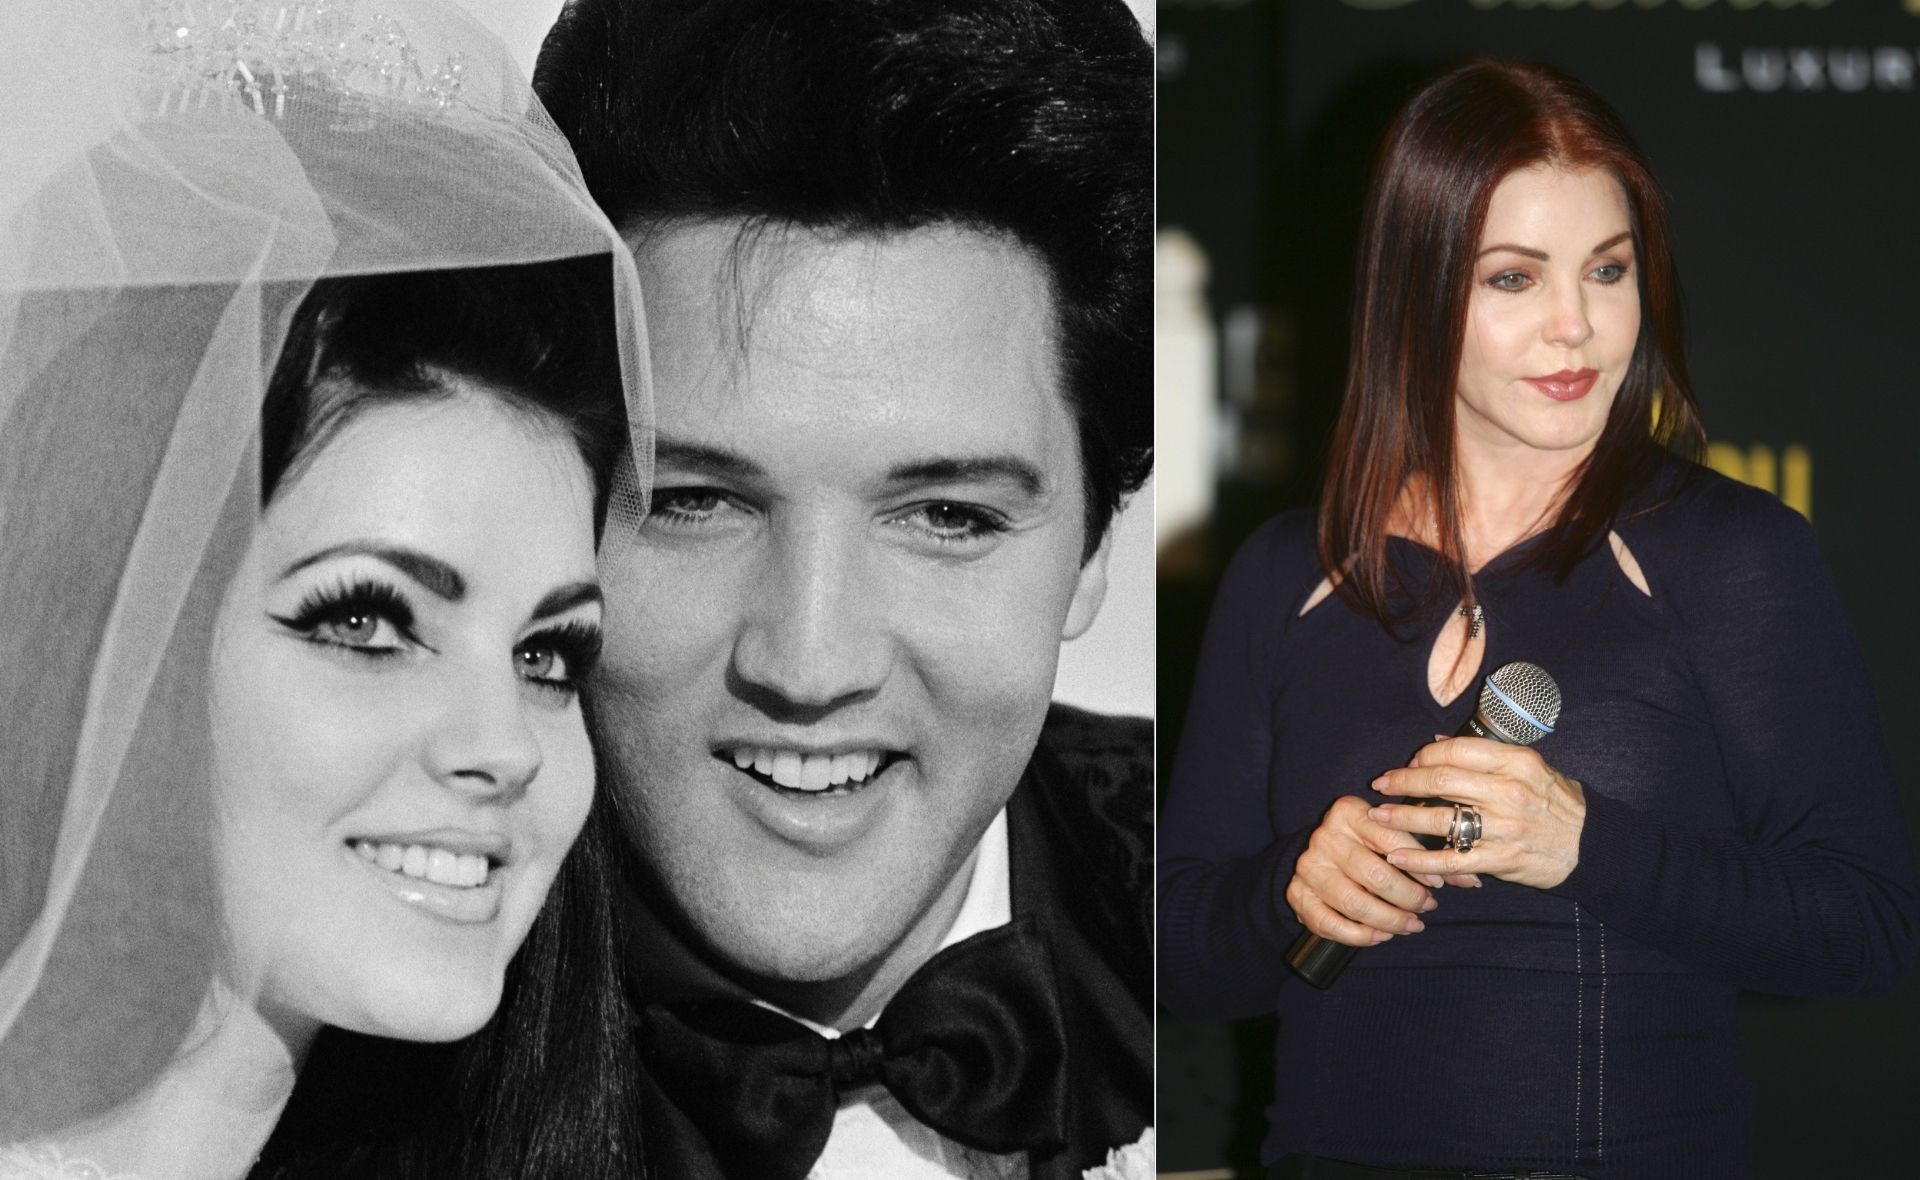 From 60s babydoll glam to businesswoman chic, Priscilla Presley’s transformation is one for the history books